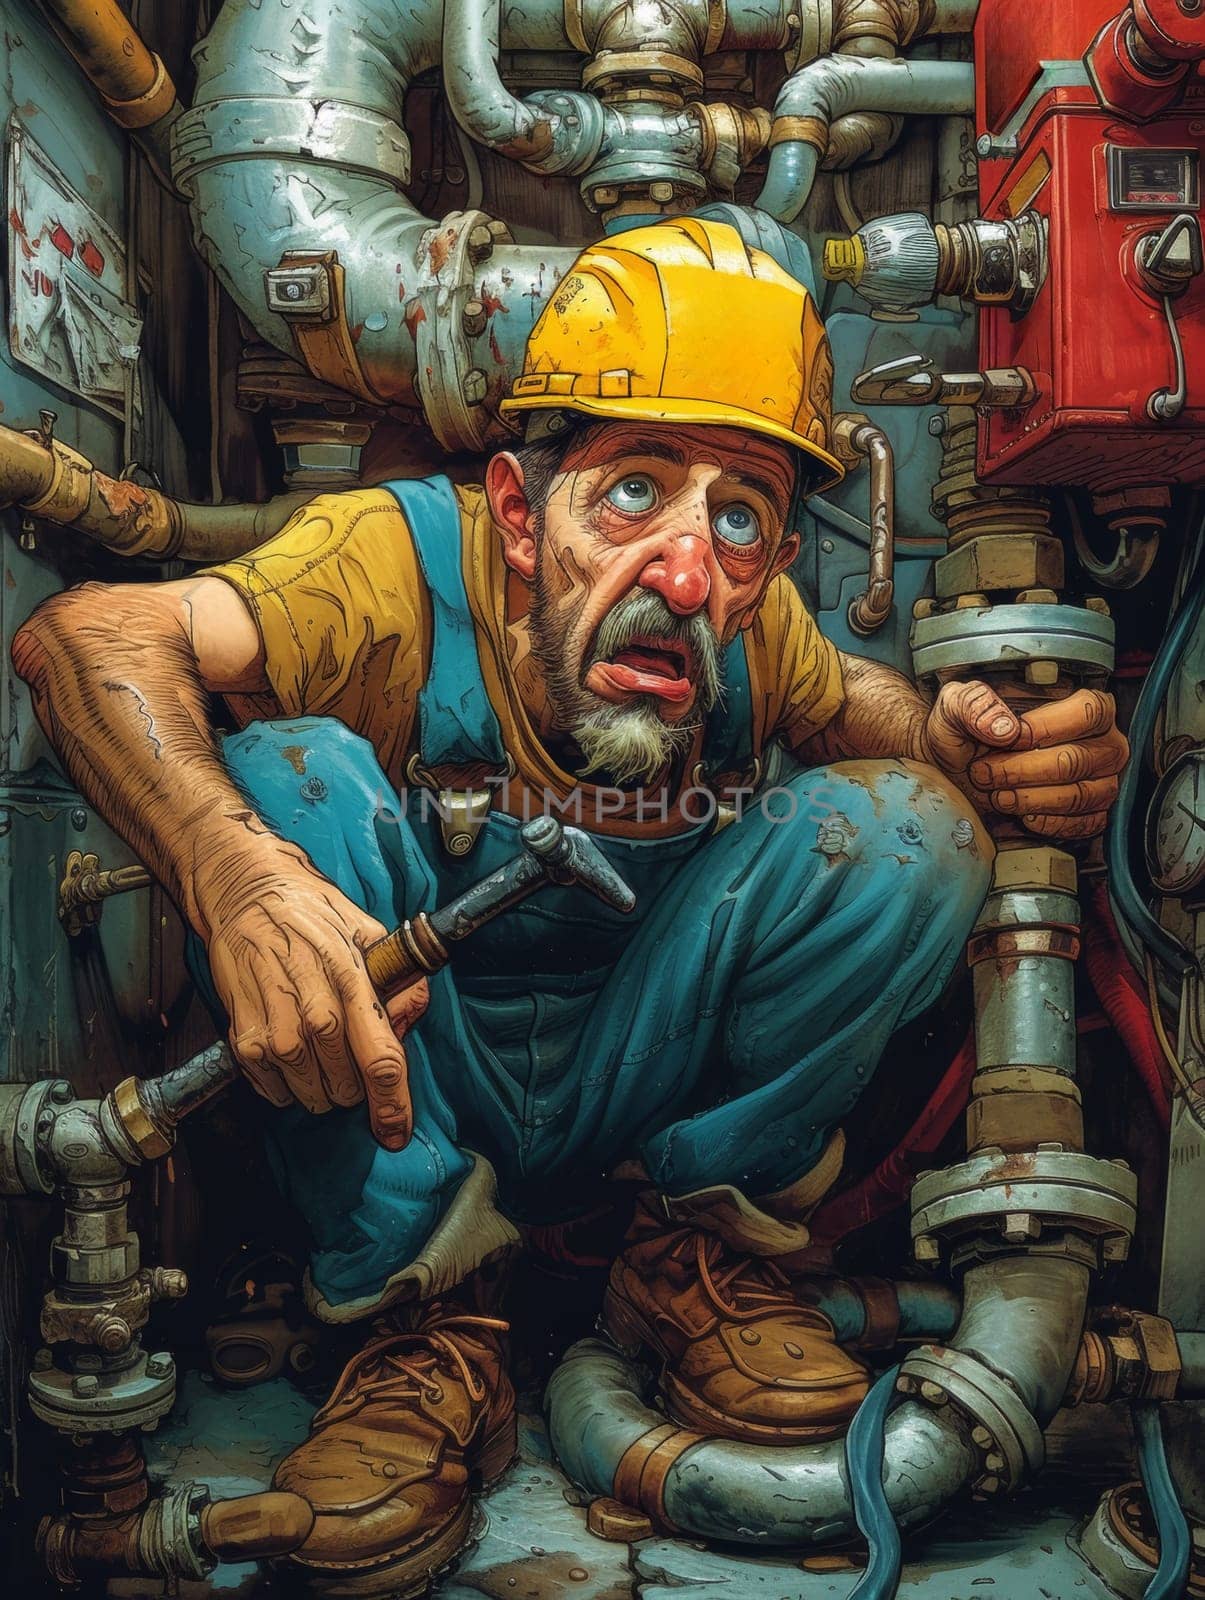 A man in a hard hat holding a wrench and pipes